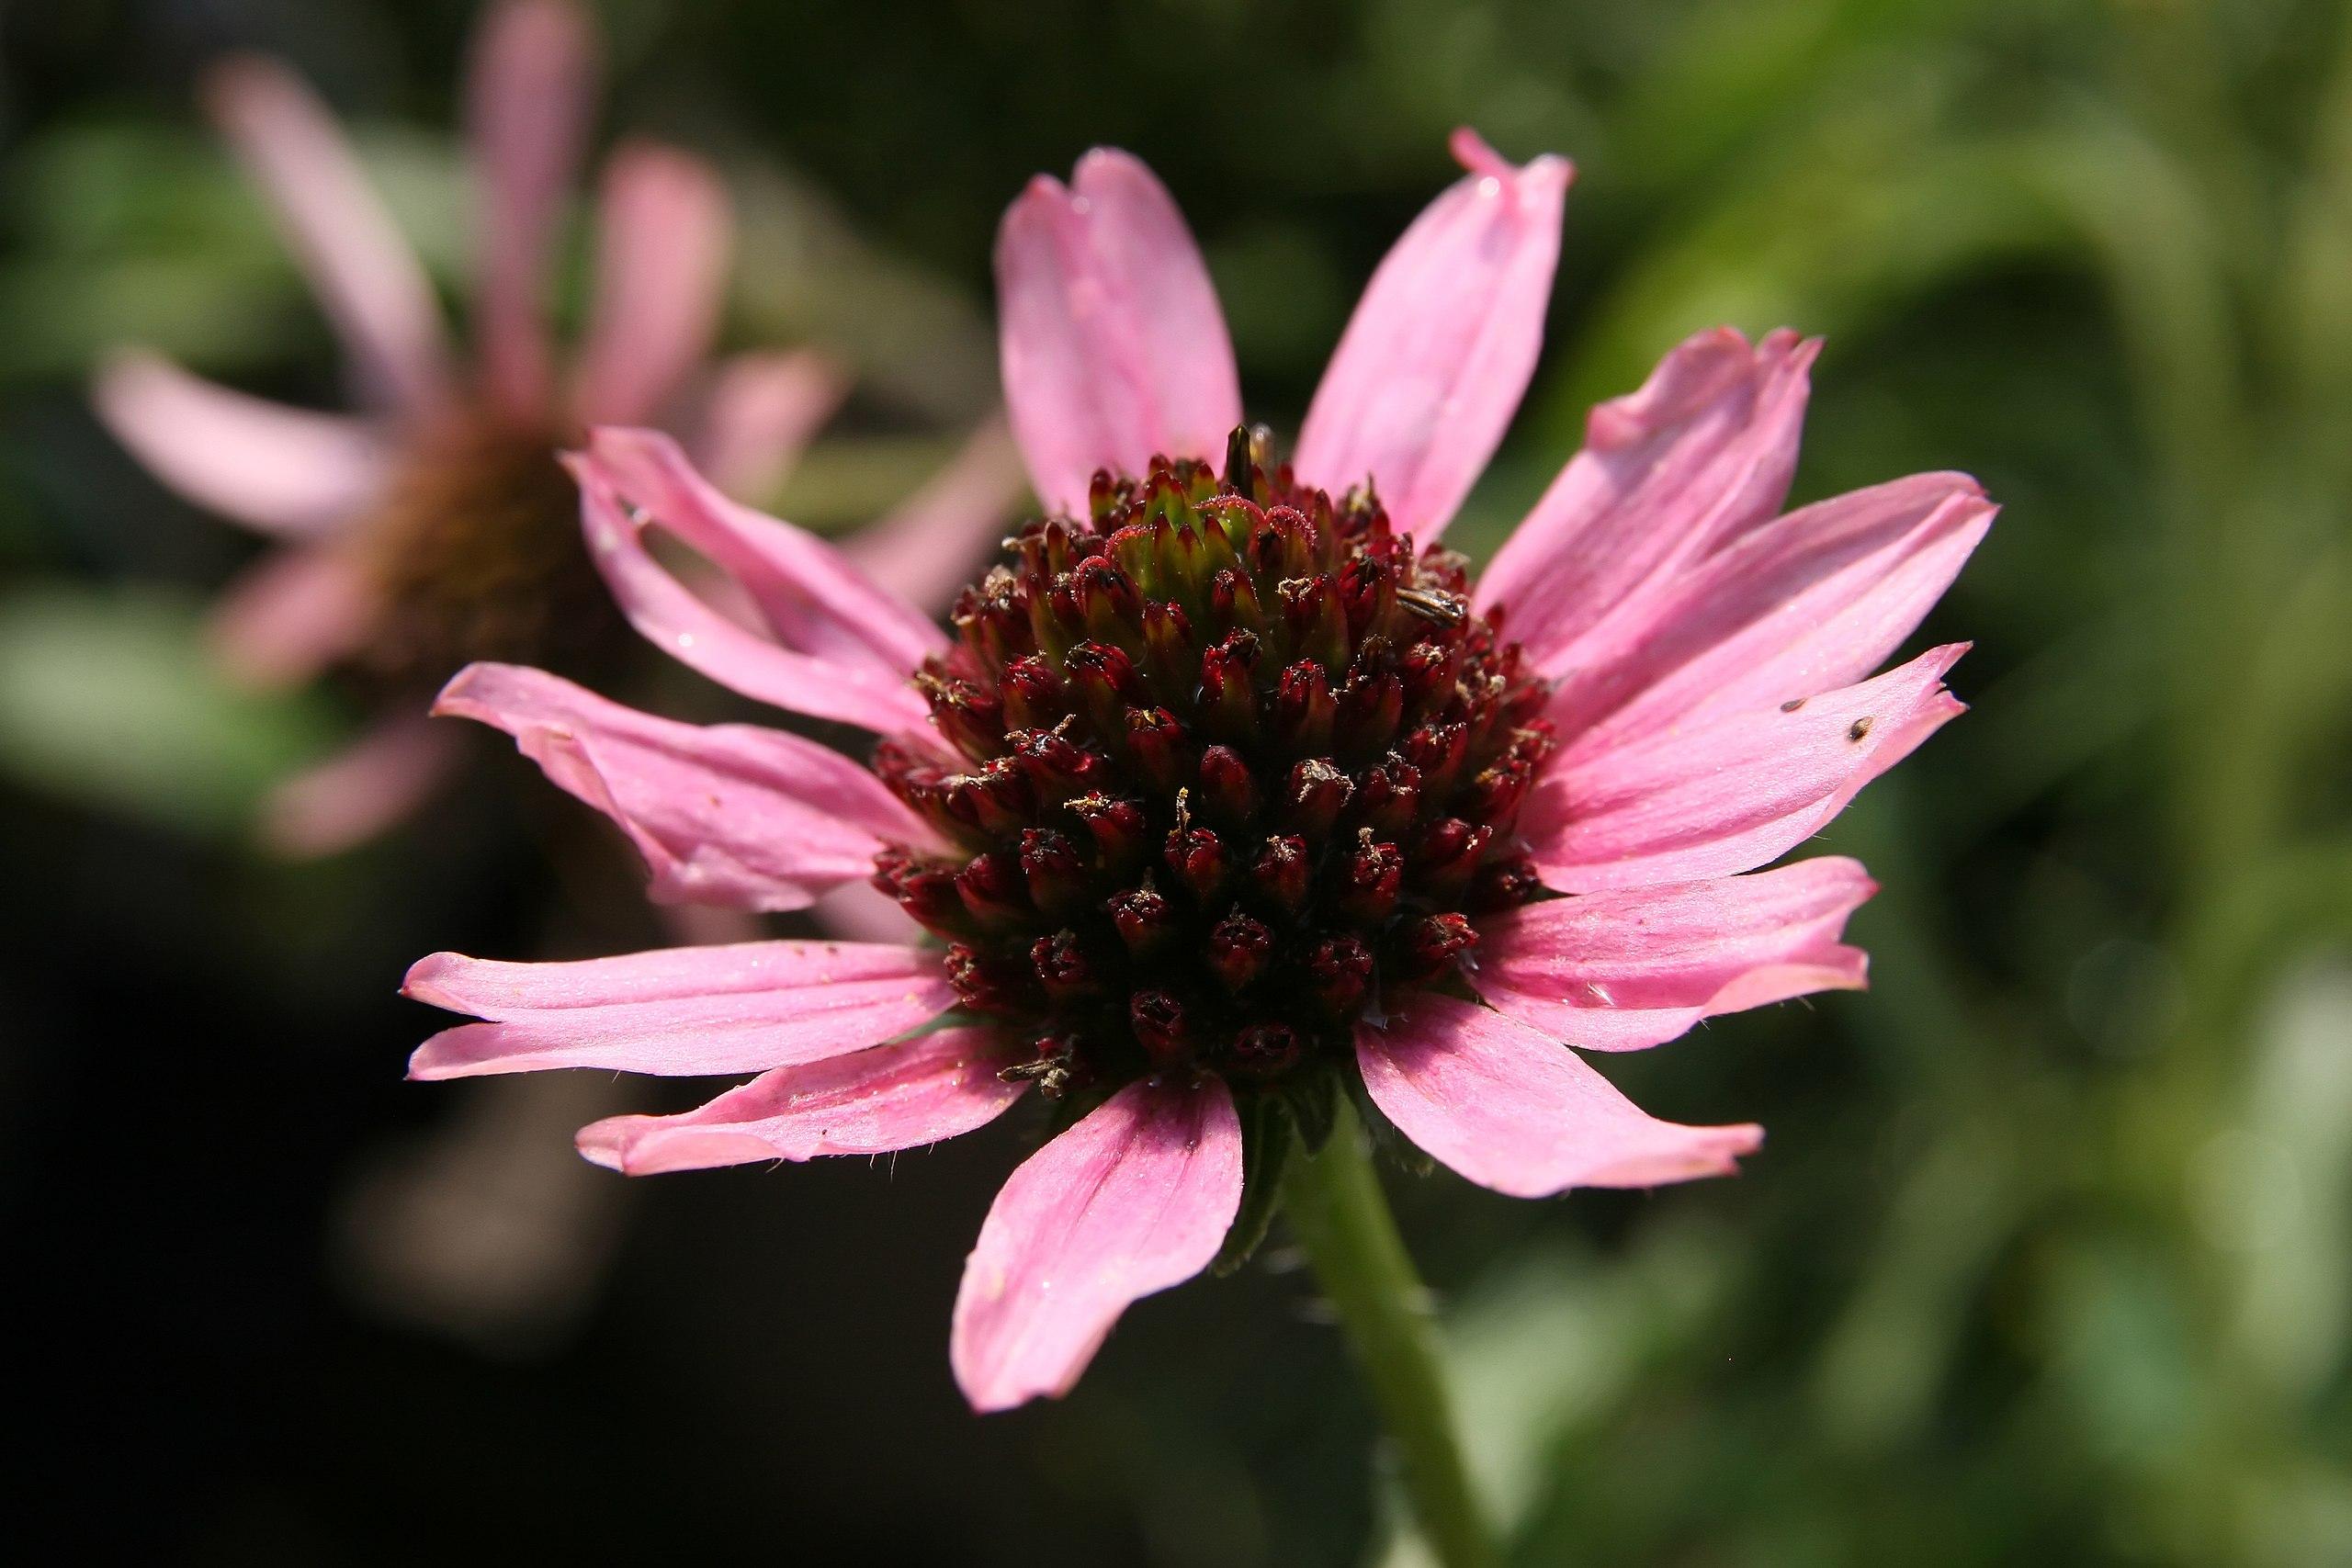 light-pink flowers with burgundy center, green stems and leaves